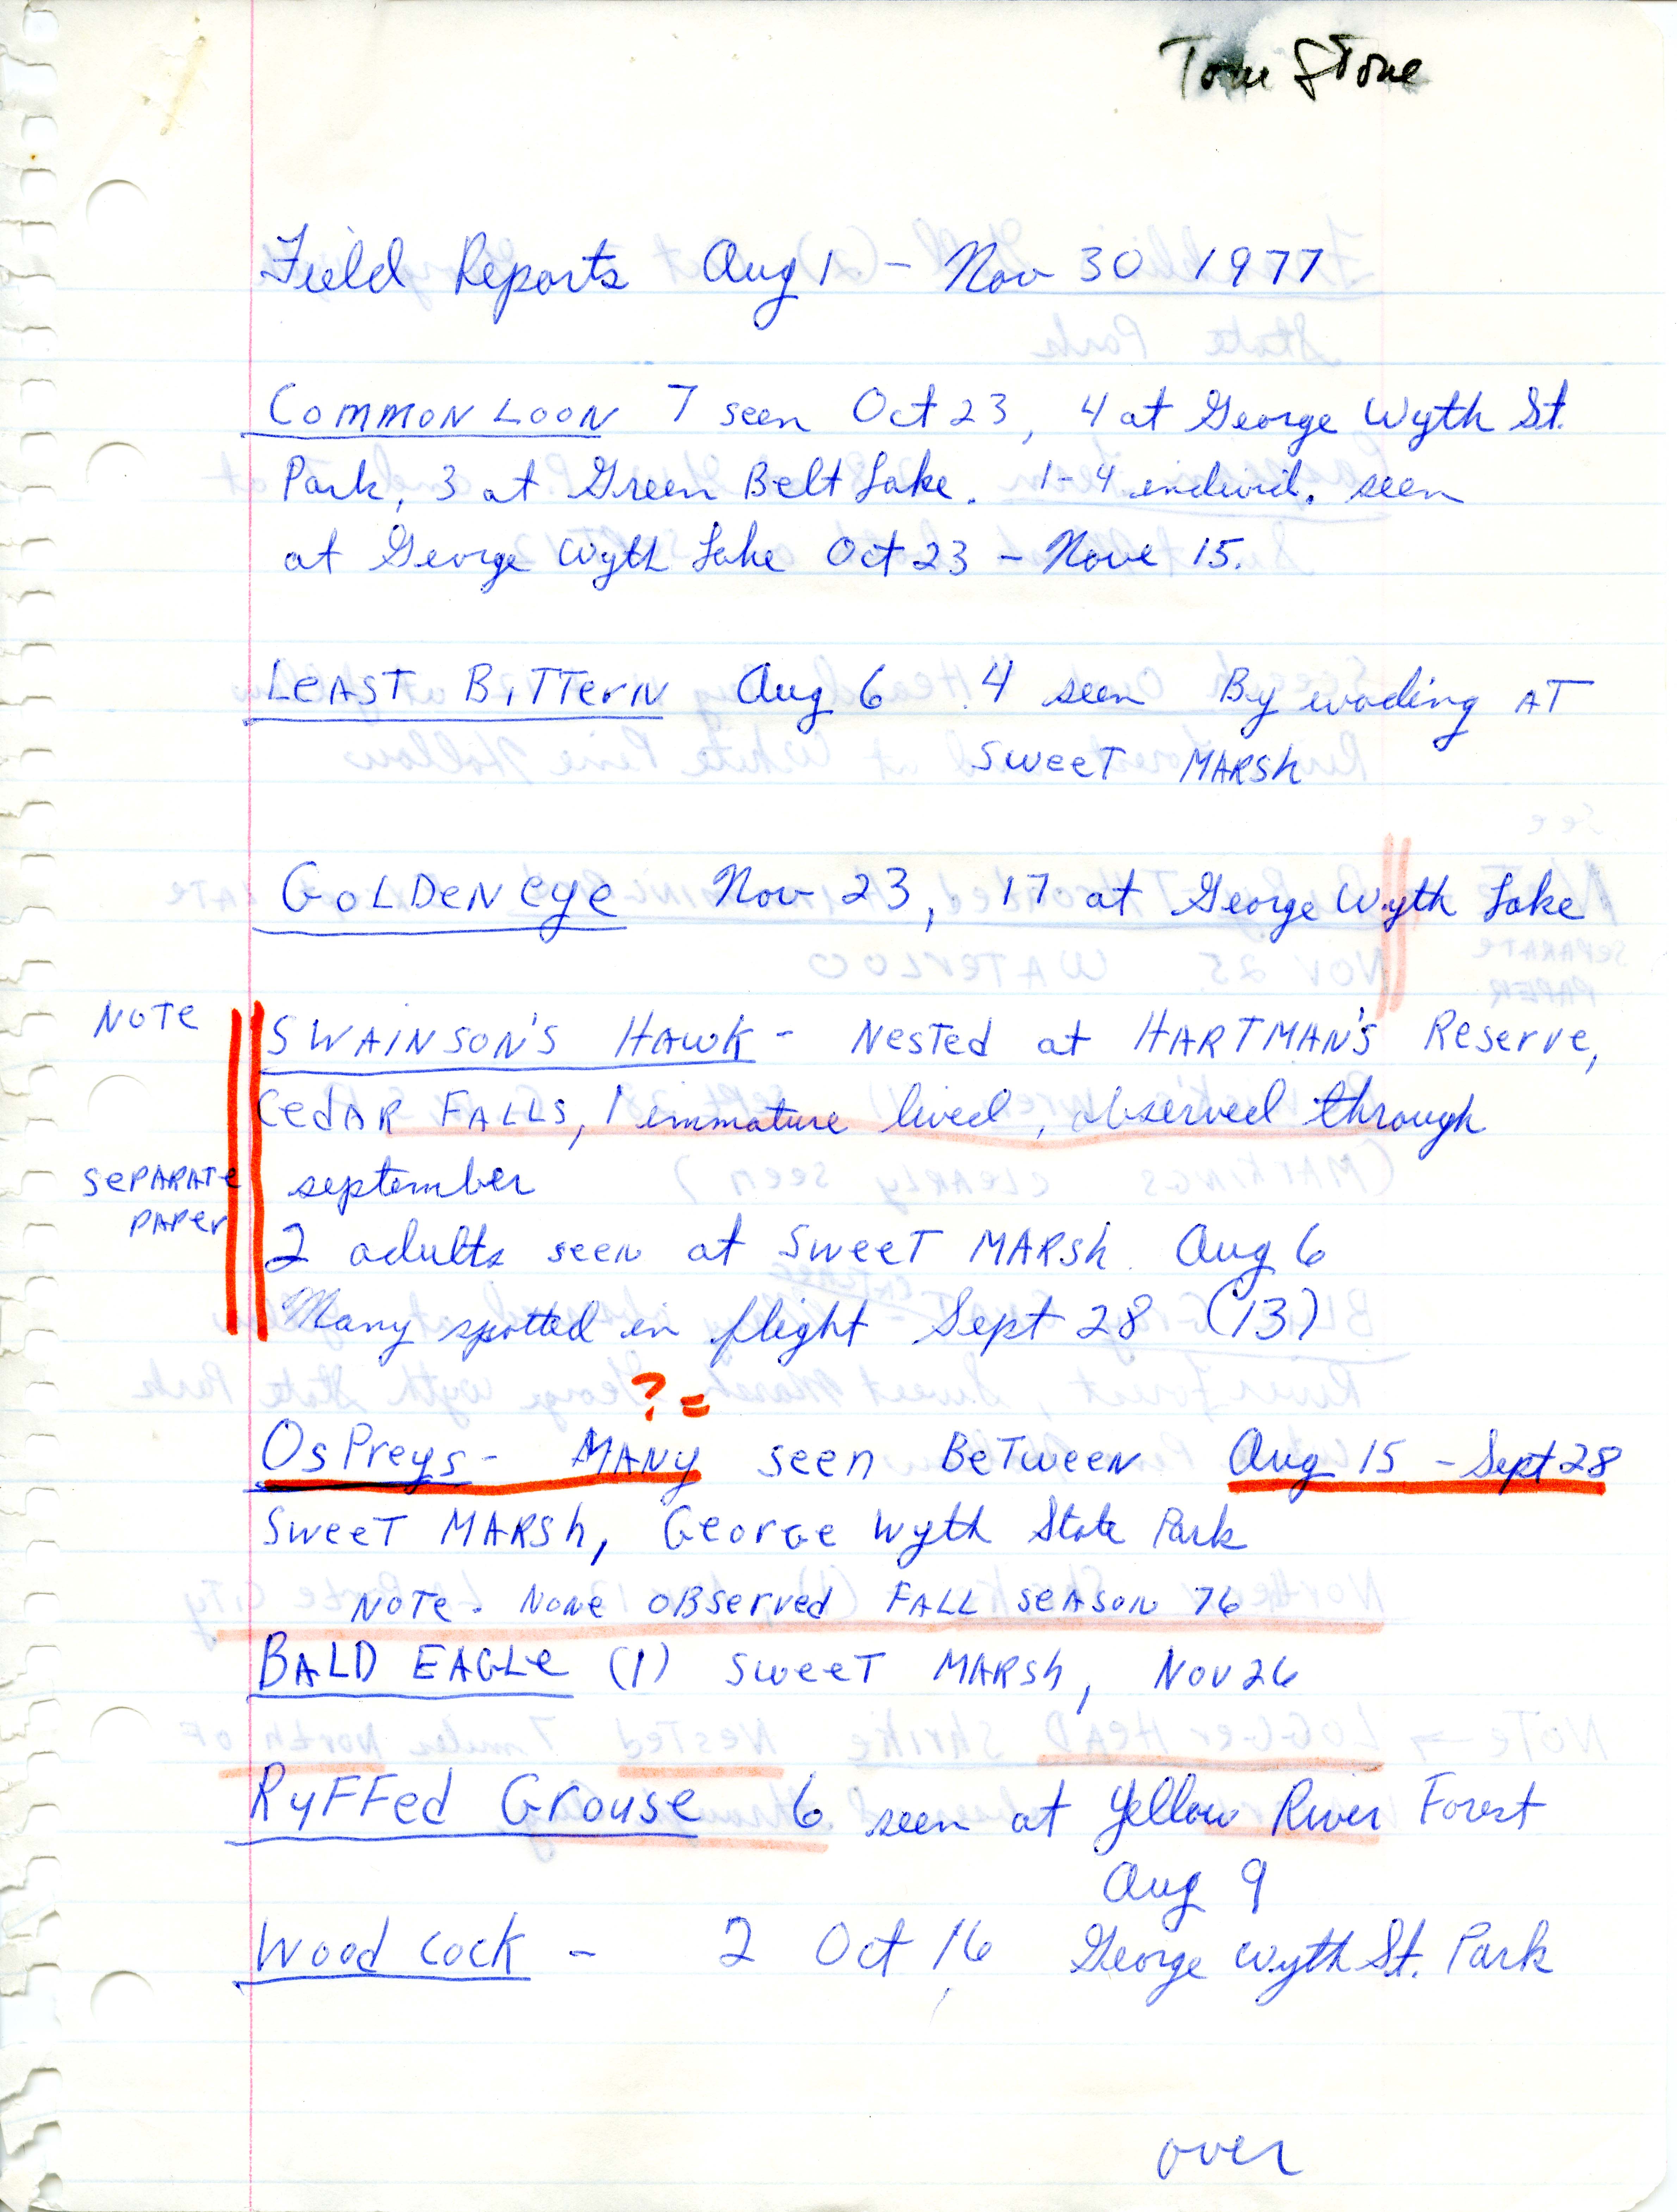 Field notes contributed by Tom Stone, fall 1977